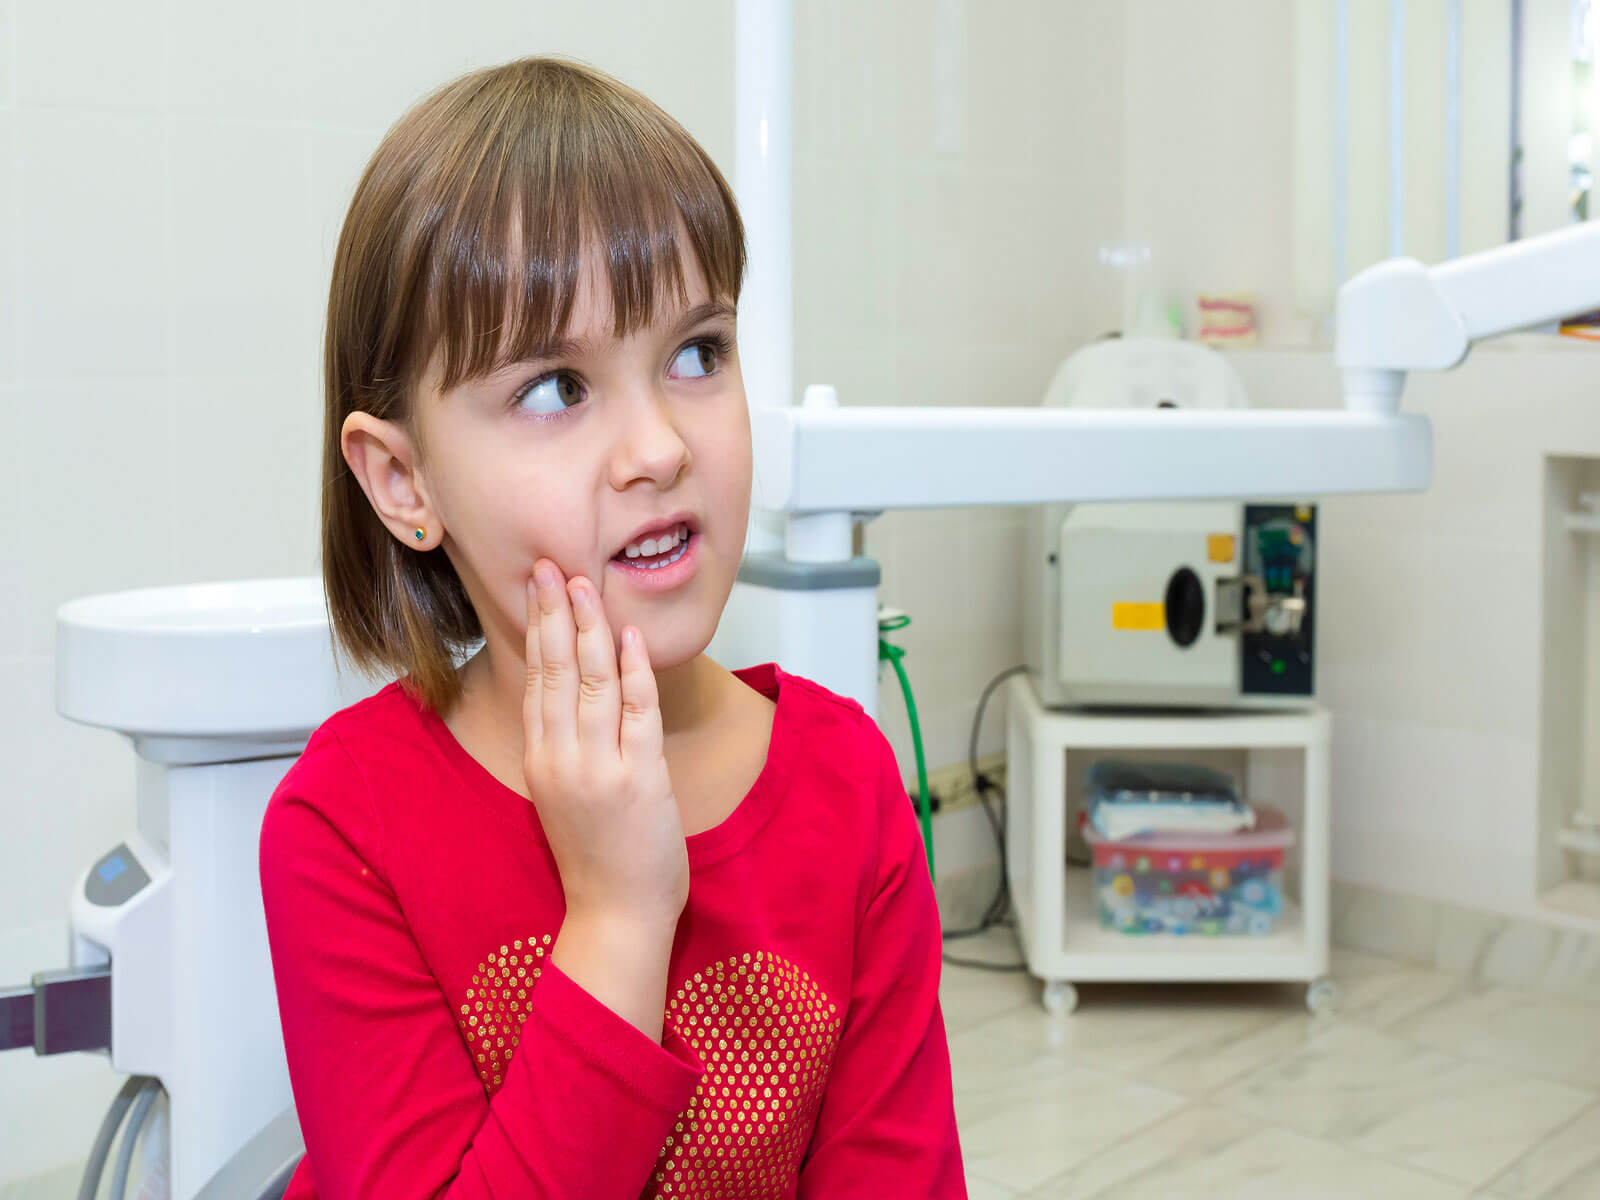 Why Does My Child Keep Getting Cavities?